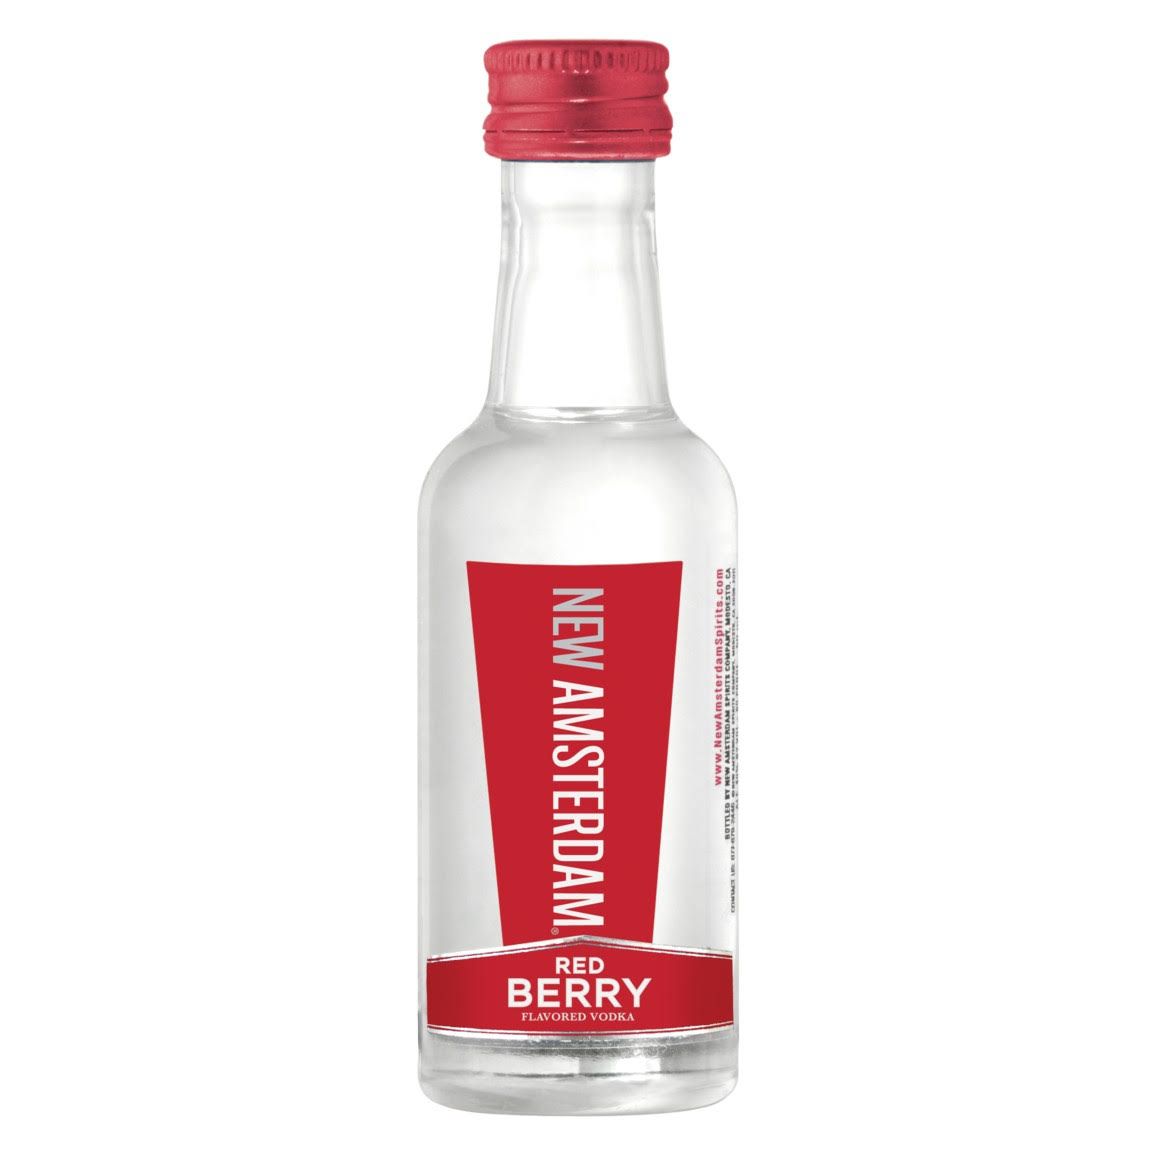 New Amsterdam Red Berry Flavored Vodka - 50ml